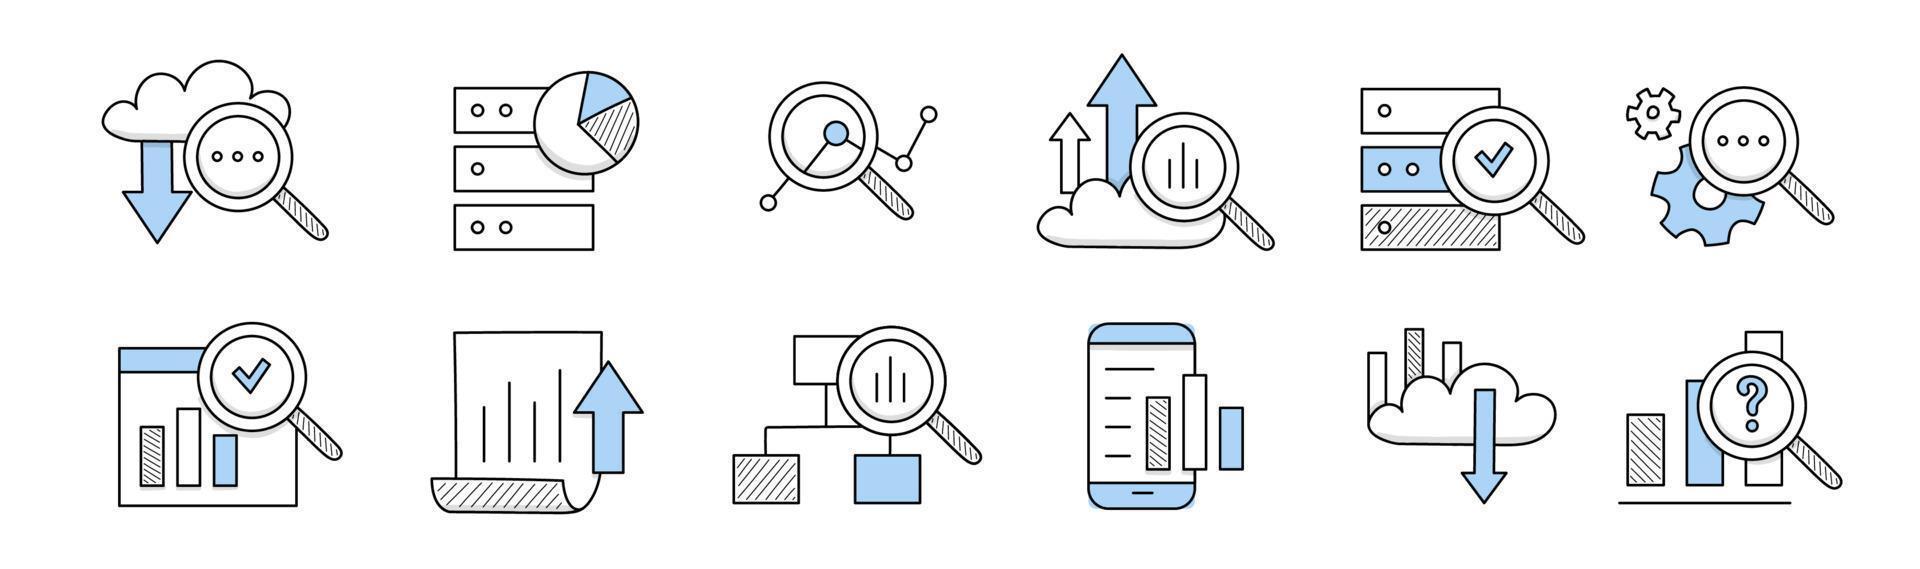 Data analysis doodle icons, line art vector signs